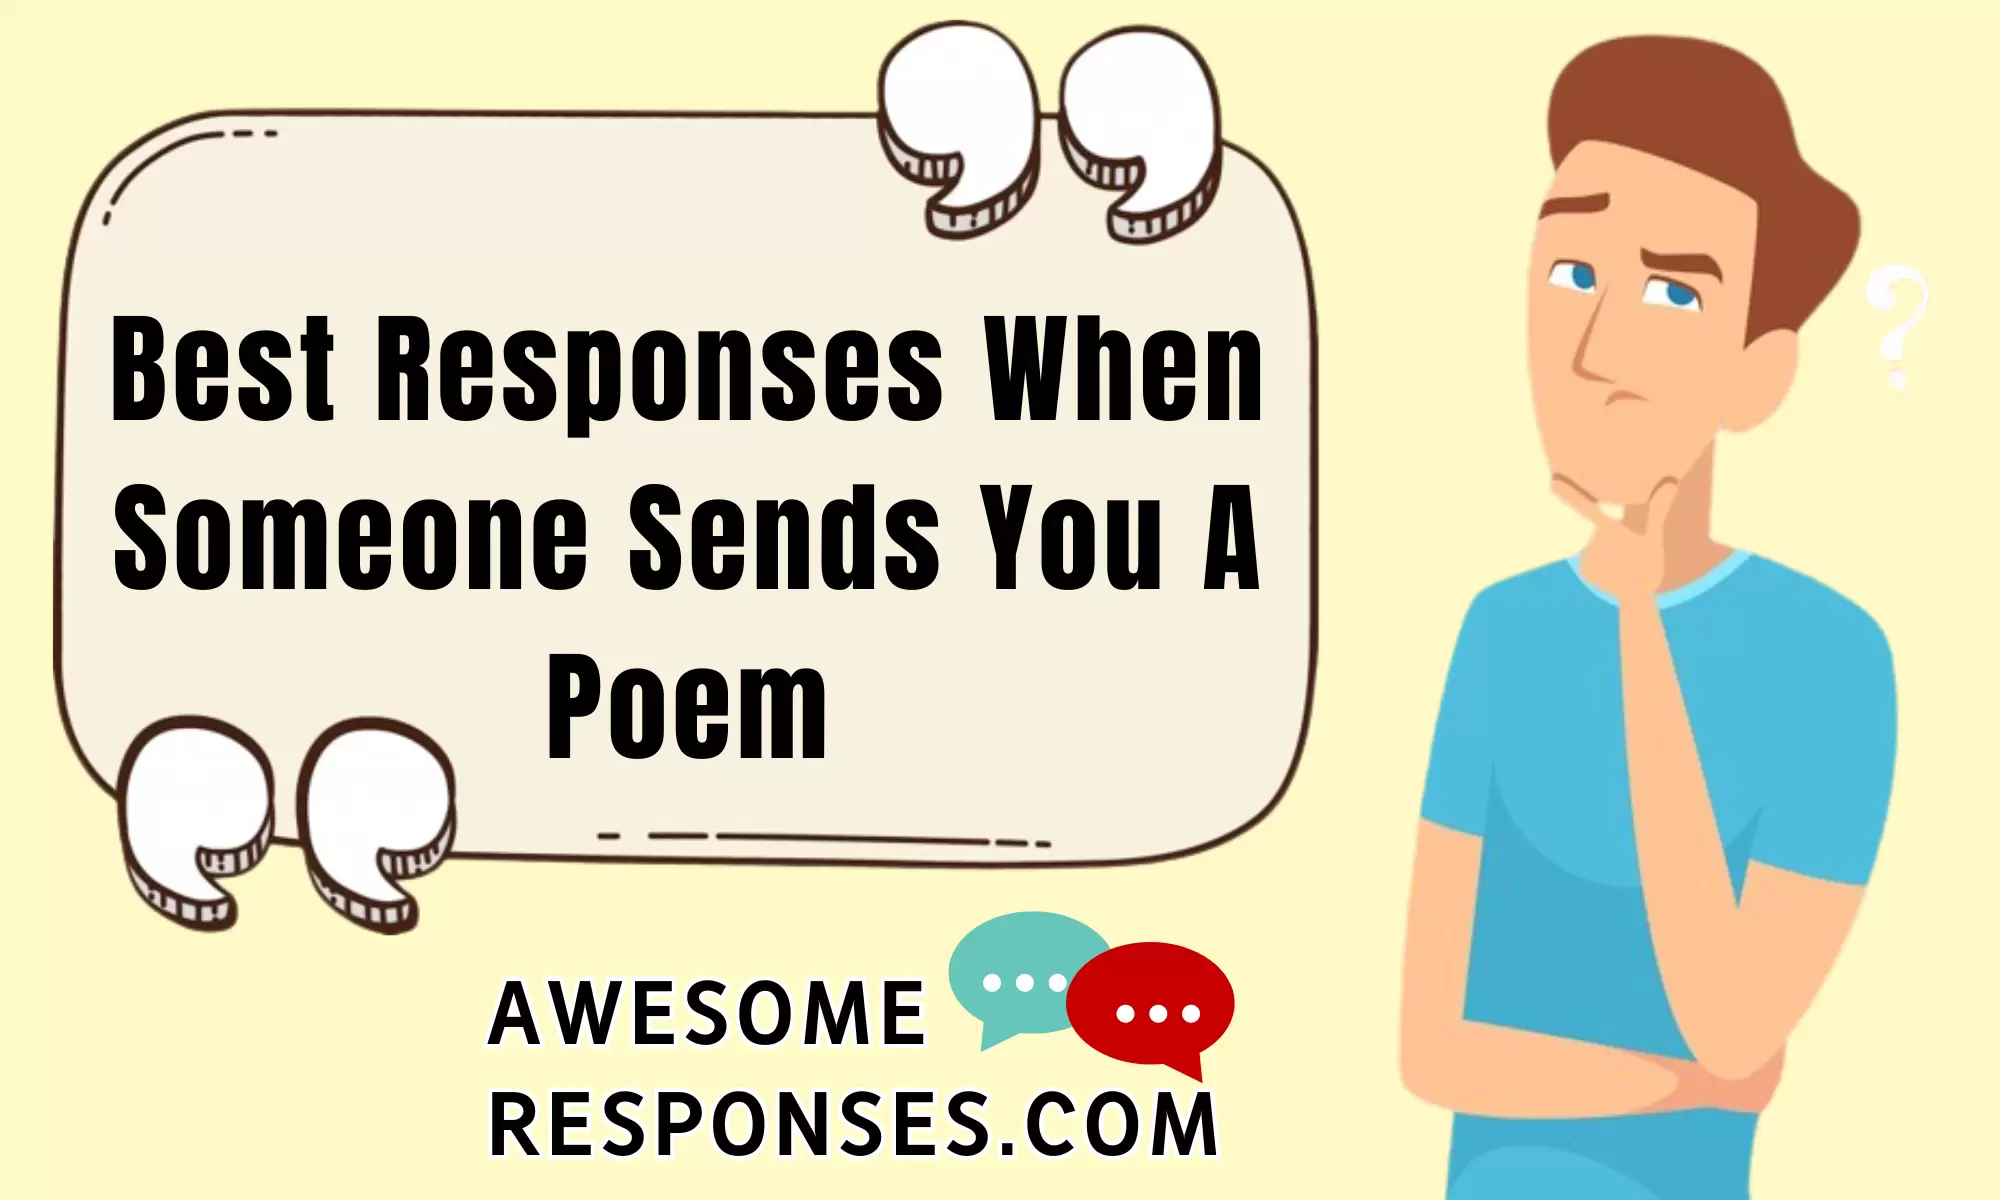 Best Responses When Someone Sends You A Poem